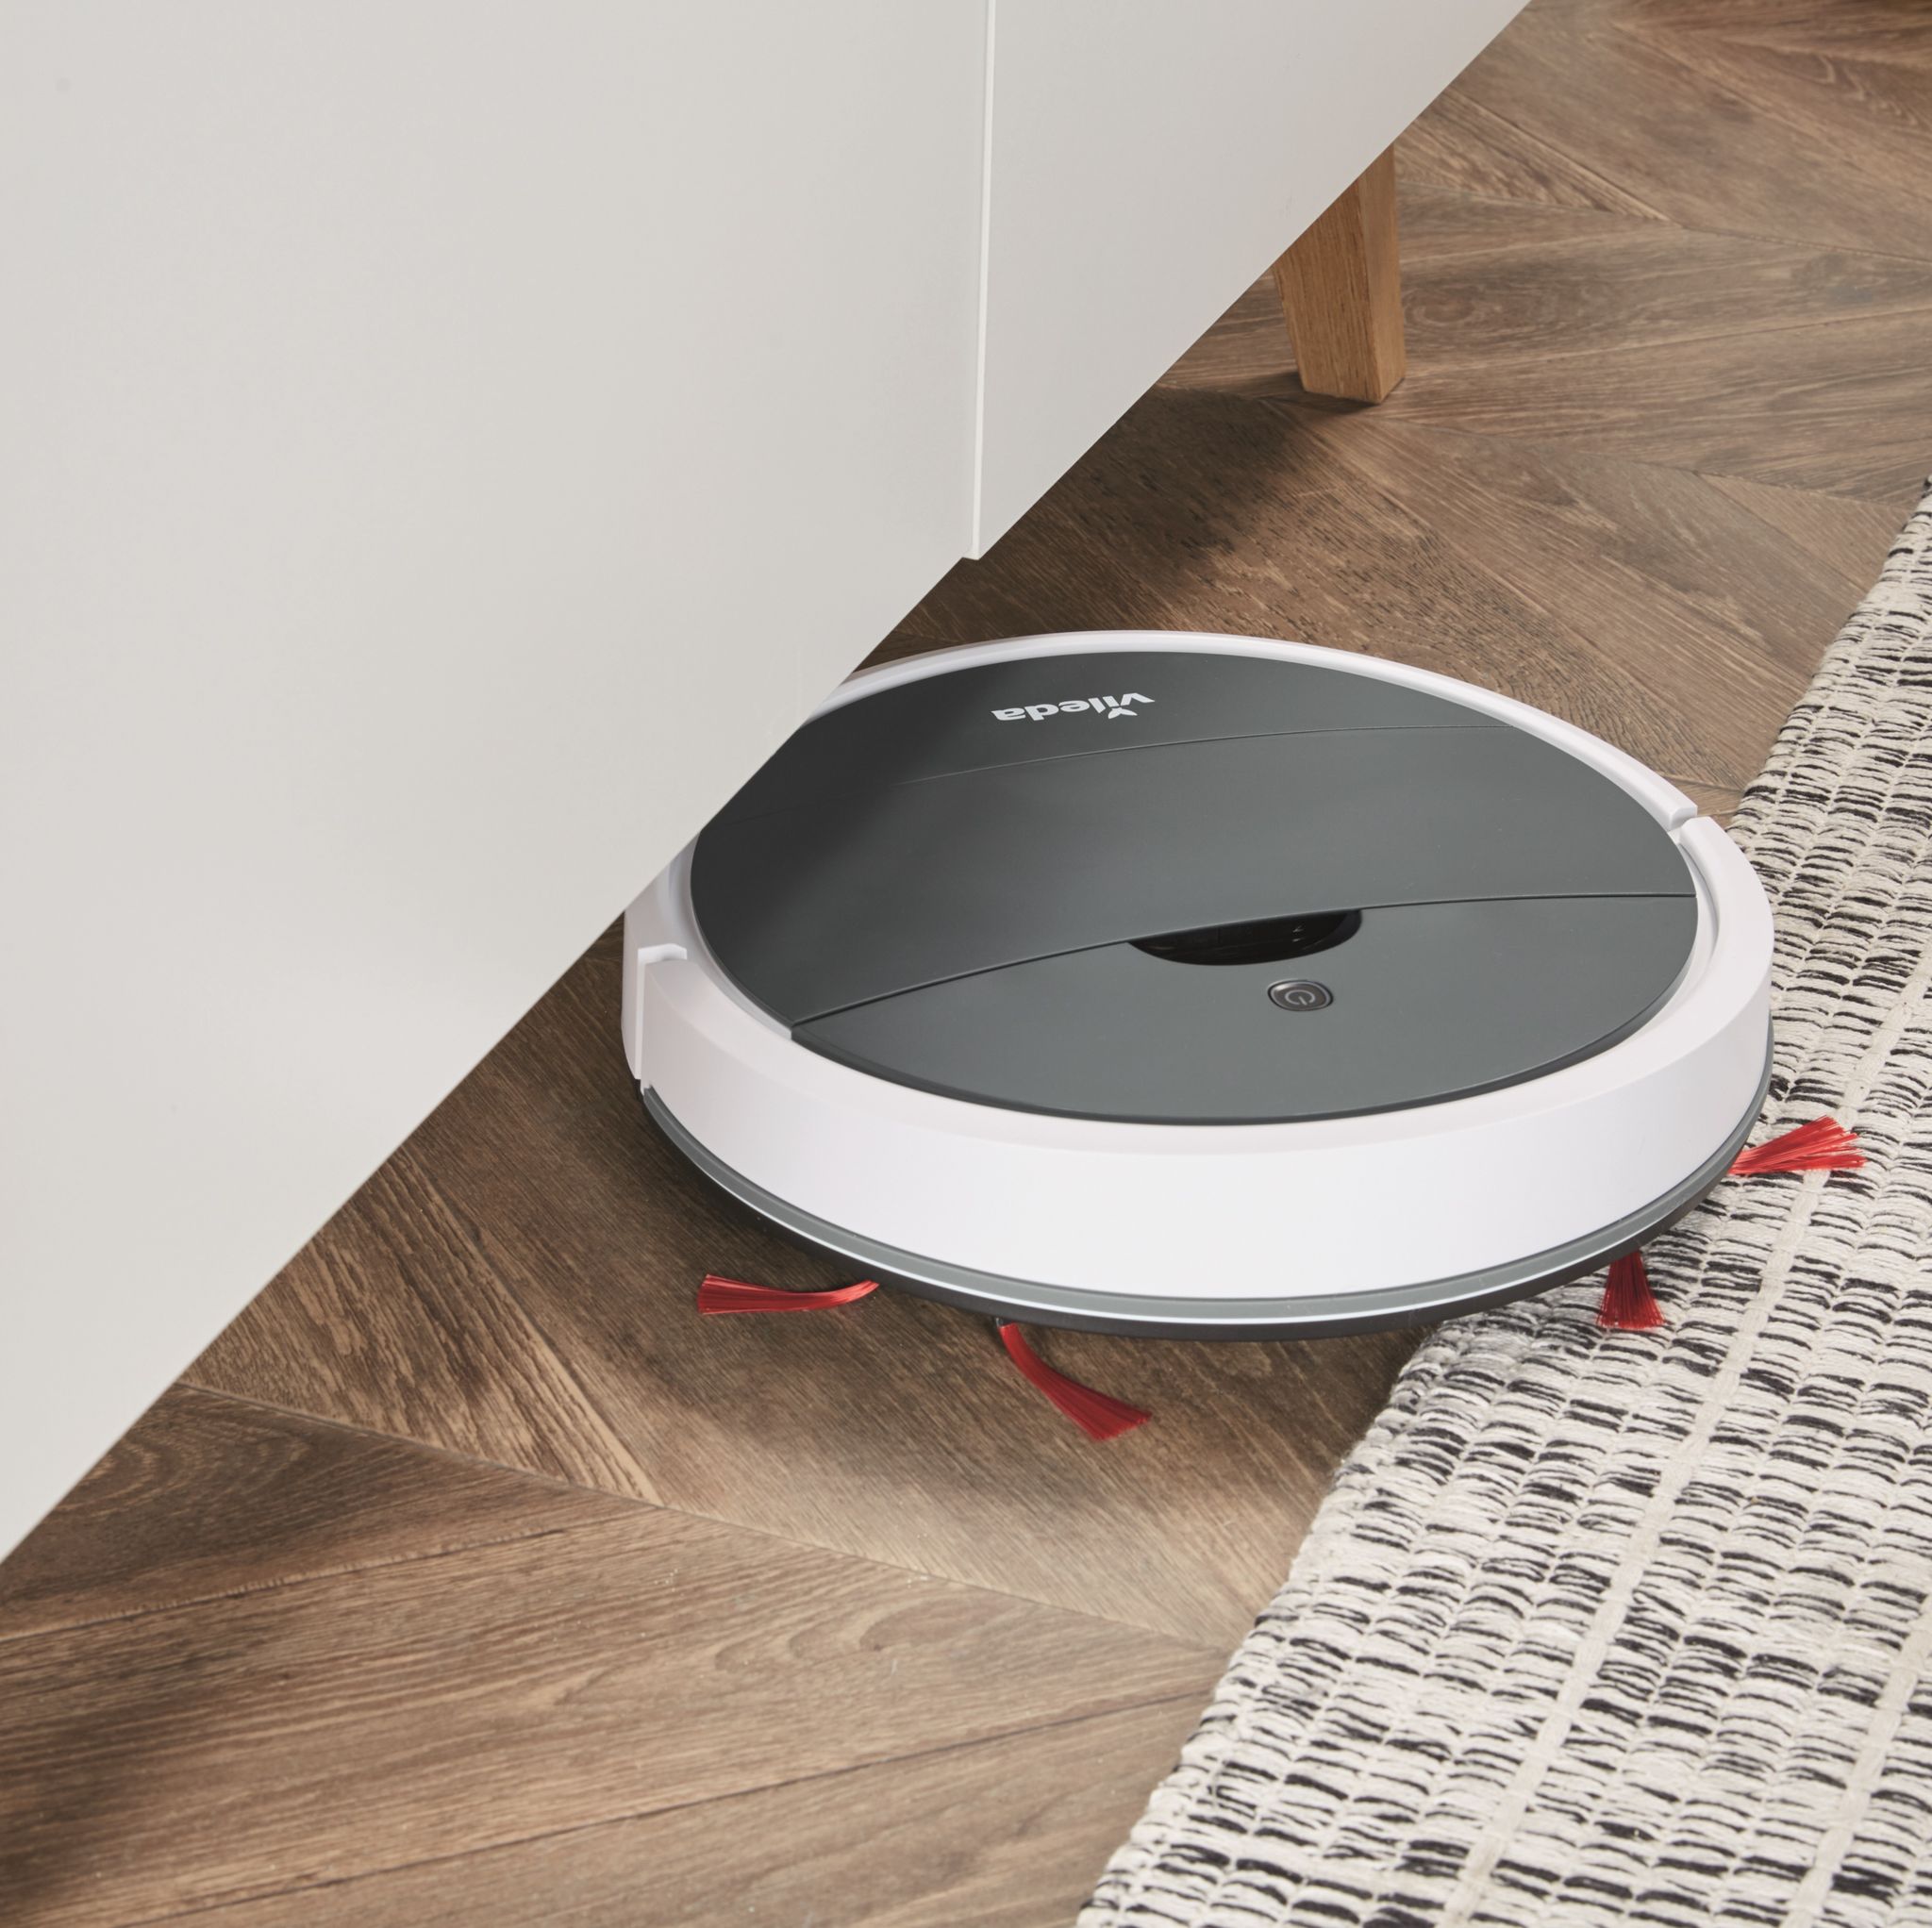 Lidl Selling Robot Cleaner For 33% Off RRP, Lidl Offers